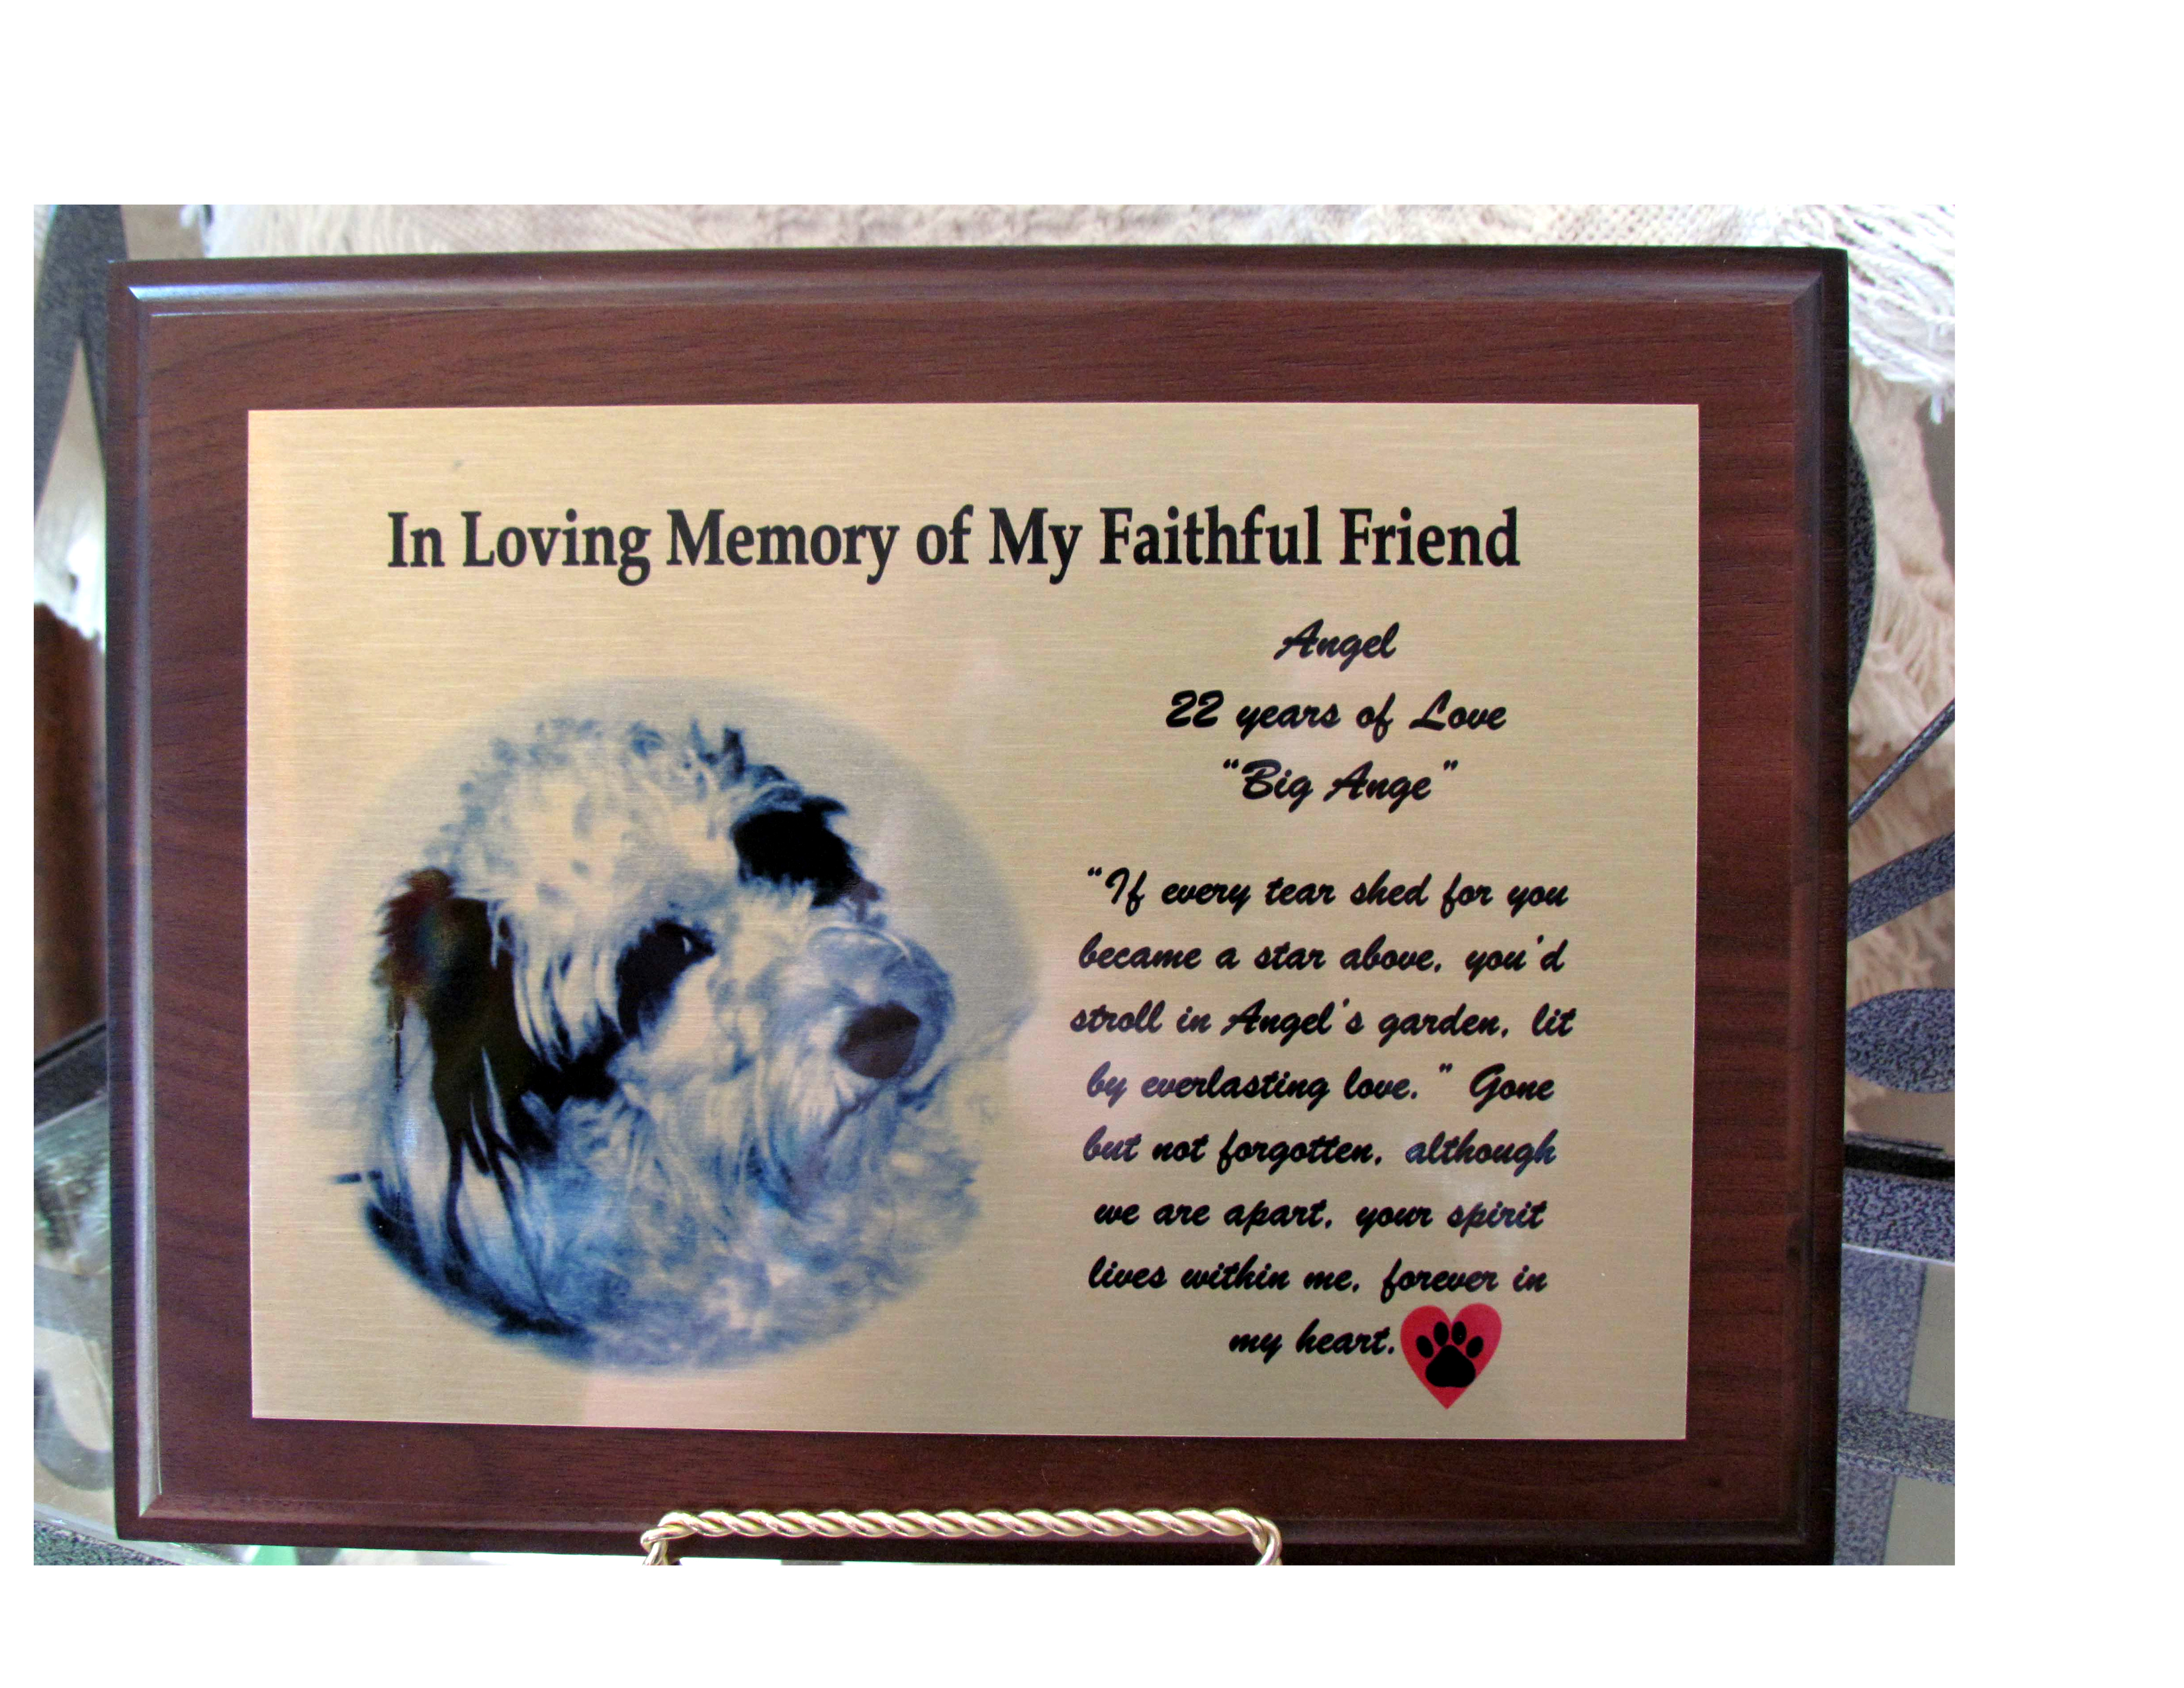 In Memory made with sublimation printing